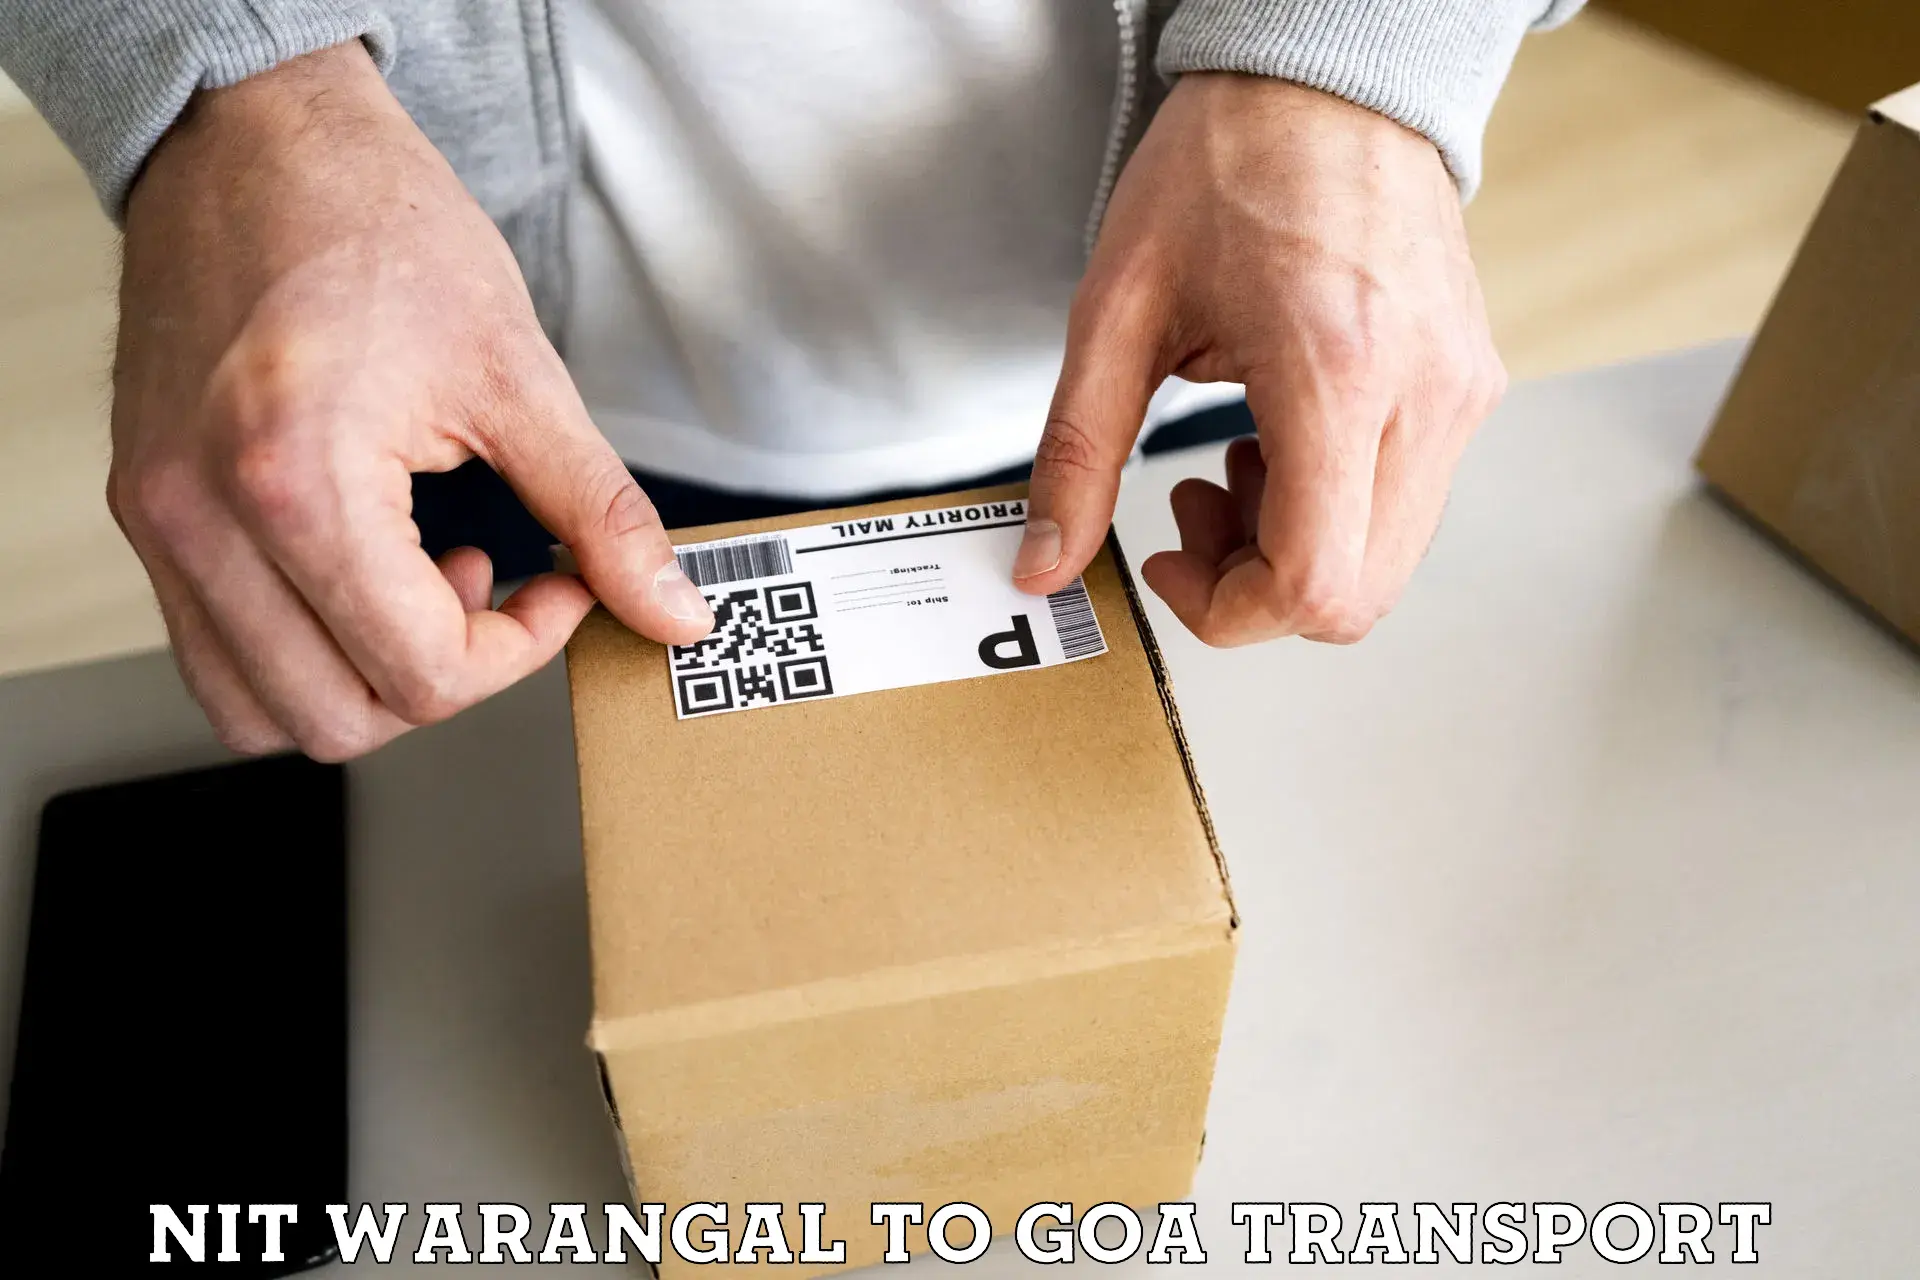 Container transport service NIT Warangal to Goa